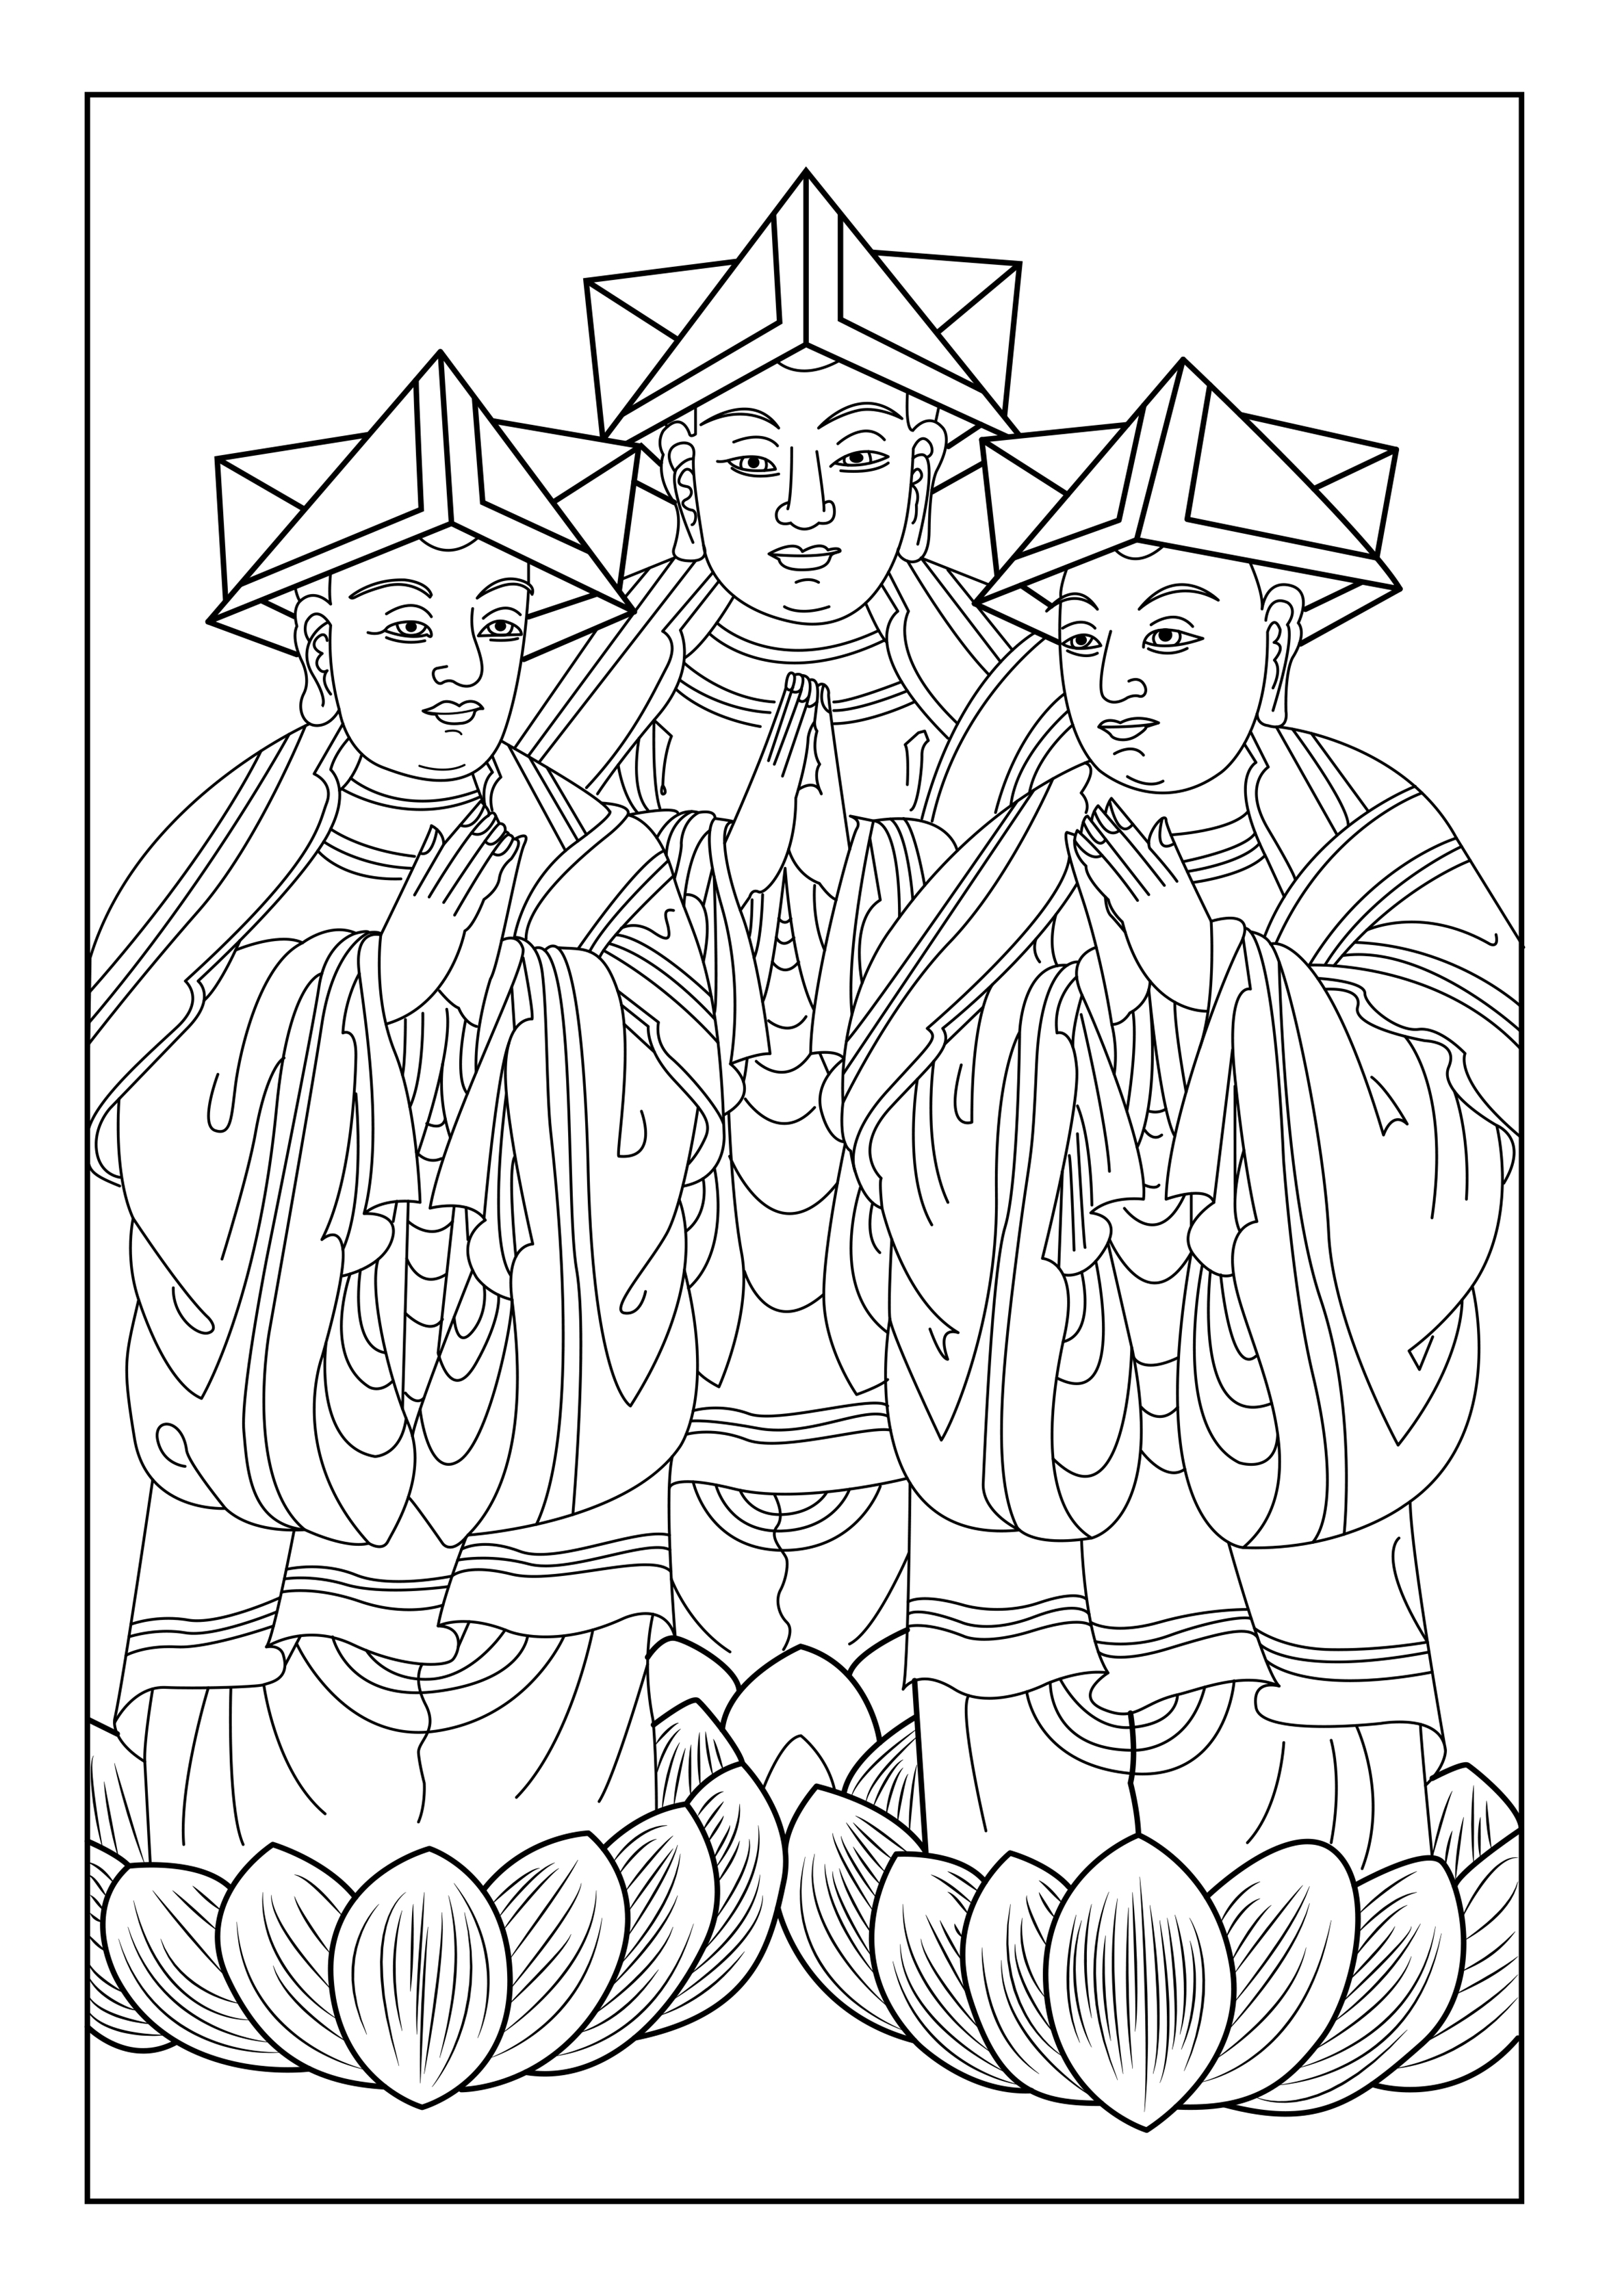 Here is a coloring page with three men of india